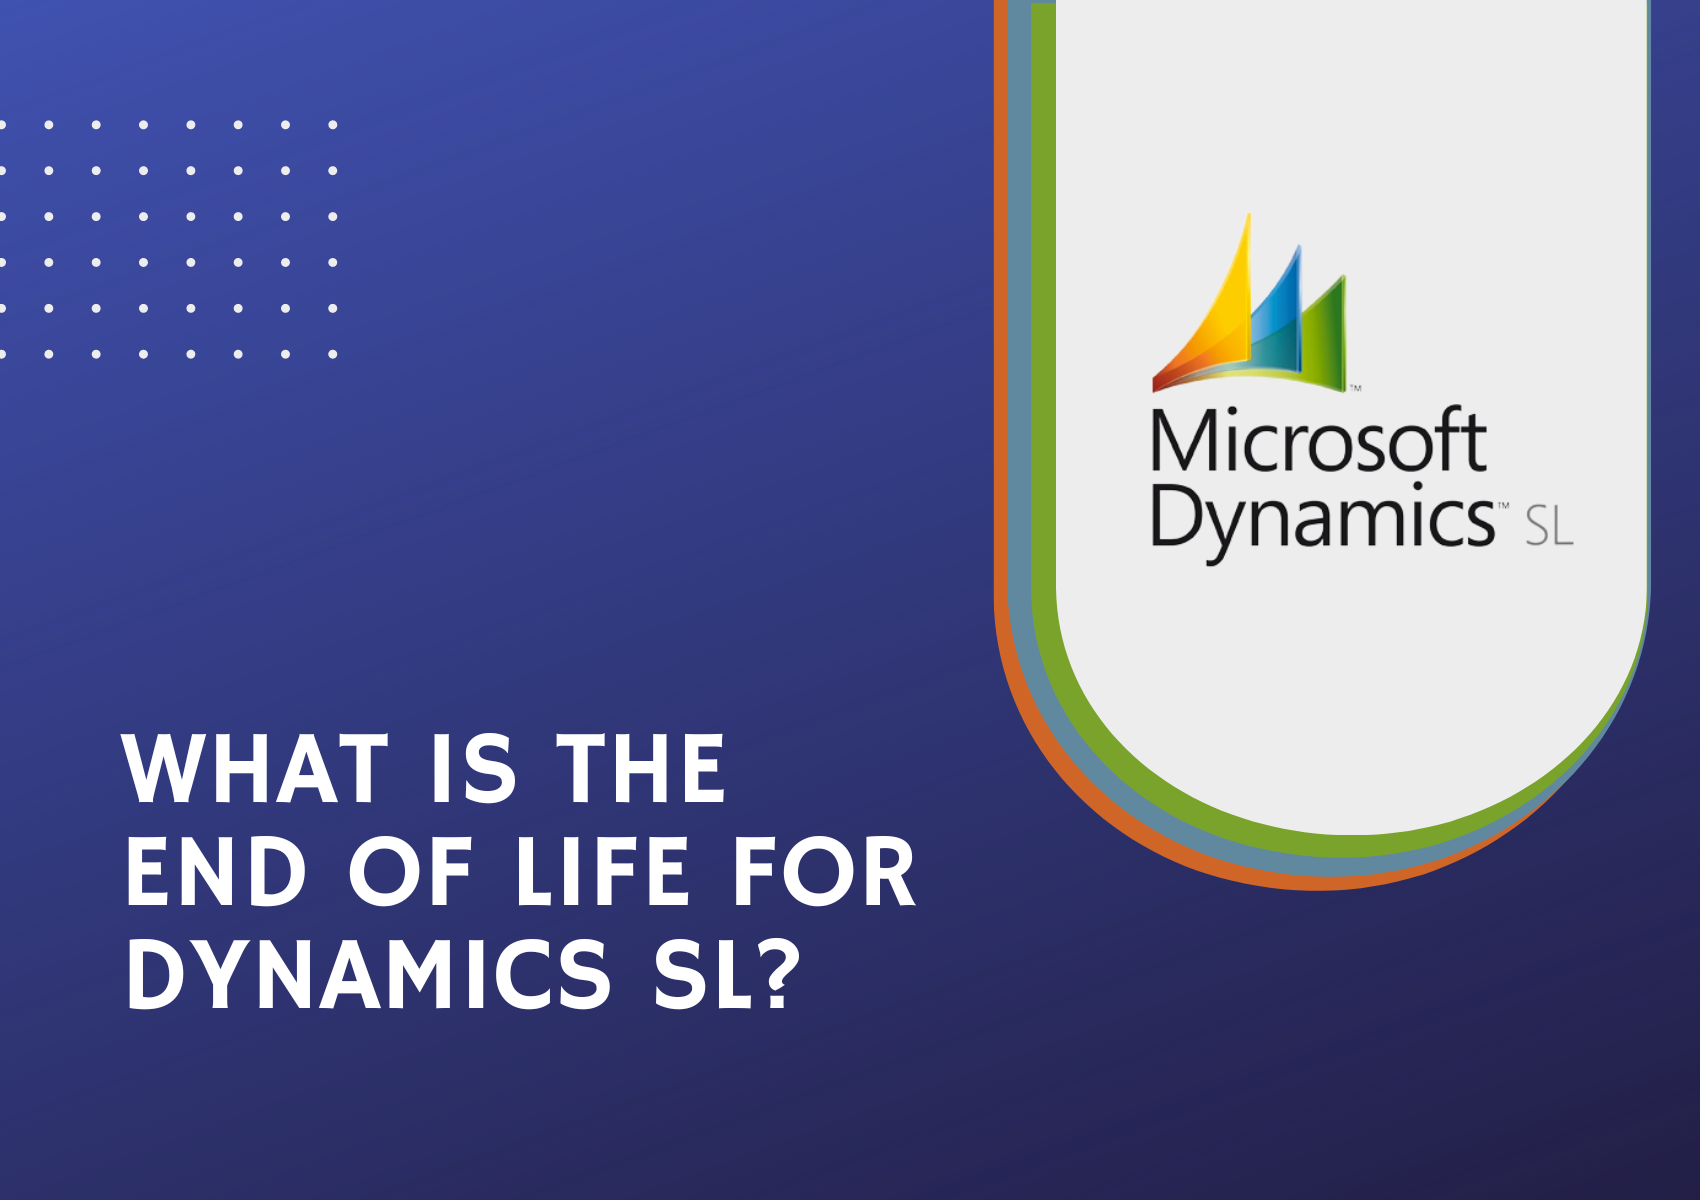 What is the End of Life for Dynamics SL